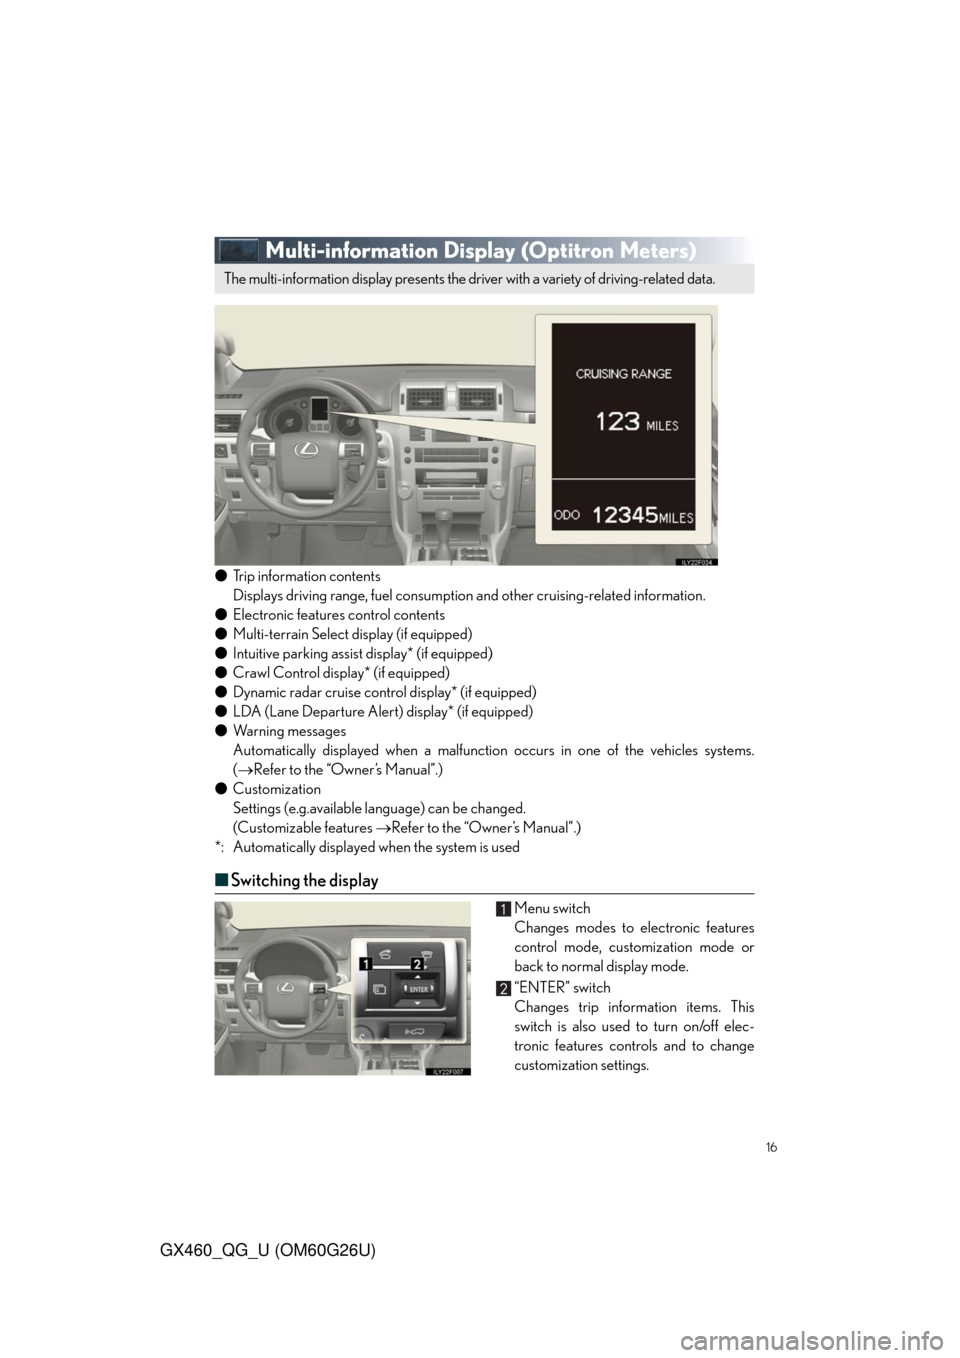 Lexus GX460 2011  Operating Other Driving Systems / LEXUS 2011 GX460  QUICK GUIDE (OM60G26U) User Guide 16
GX460_QG_U (OM60G26U)
Multi-information Display (Optitron Meters)
●Trip information contents
Displays driving range, fuel consumption and other cruising-related information.
●Electronic feature